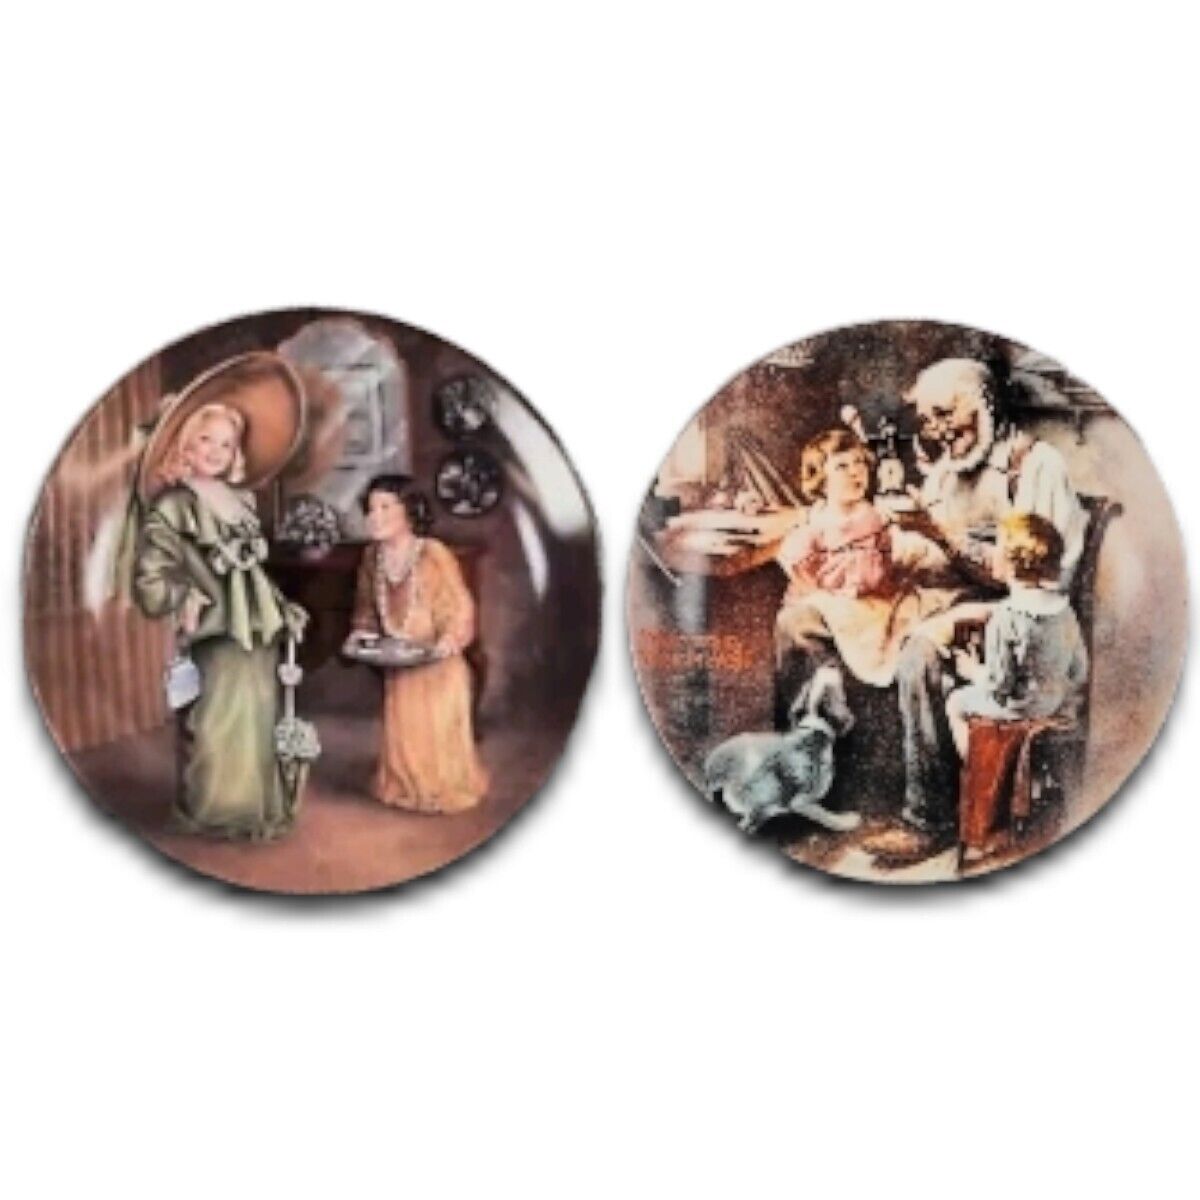 Norman Rockwell Plates Set of 2 Porcelain Collectible Claire Freedman Vintage